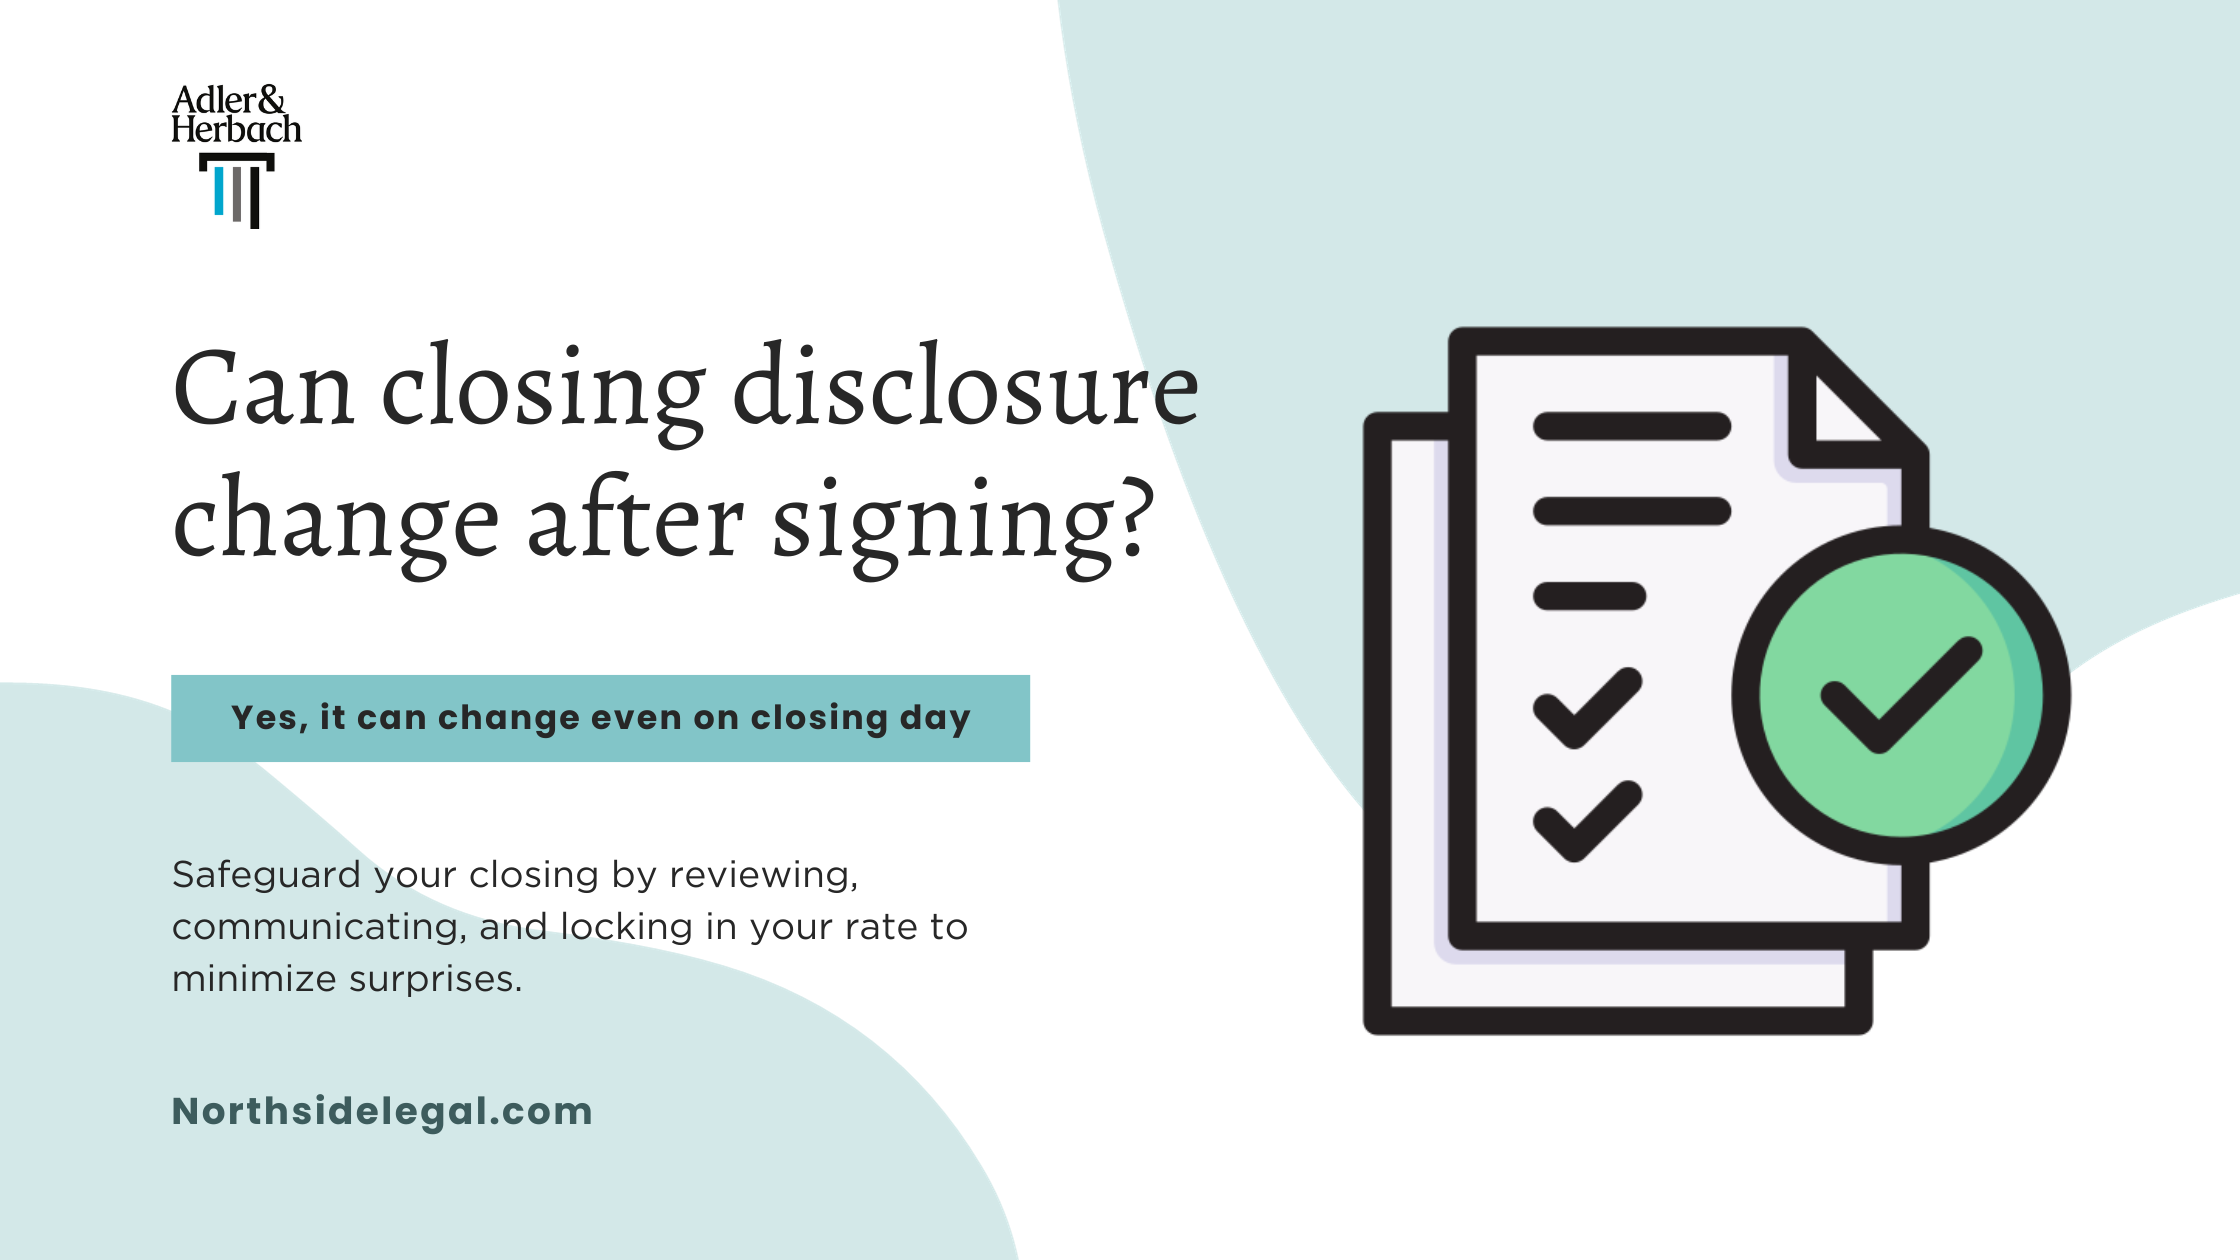 Can closing disclosure change after signing?